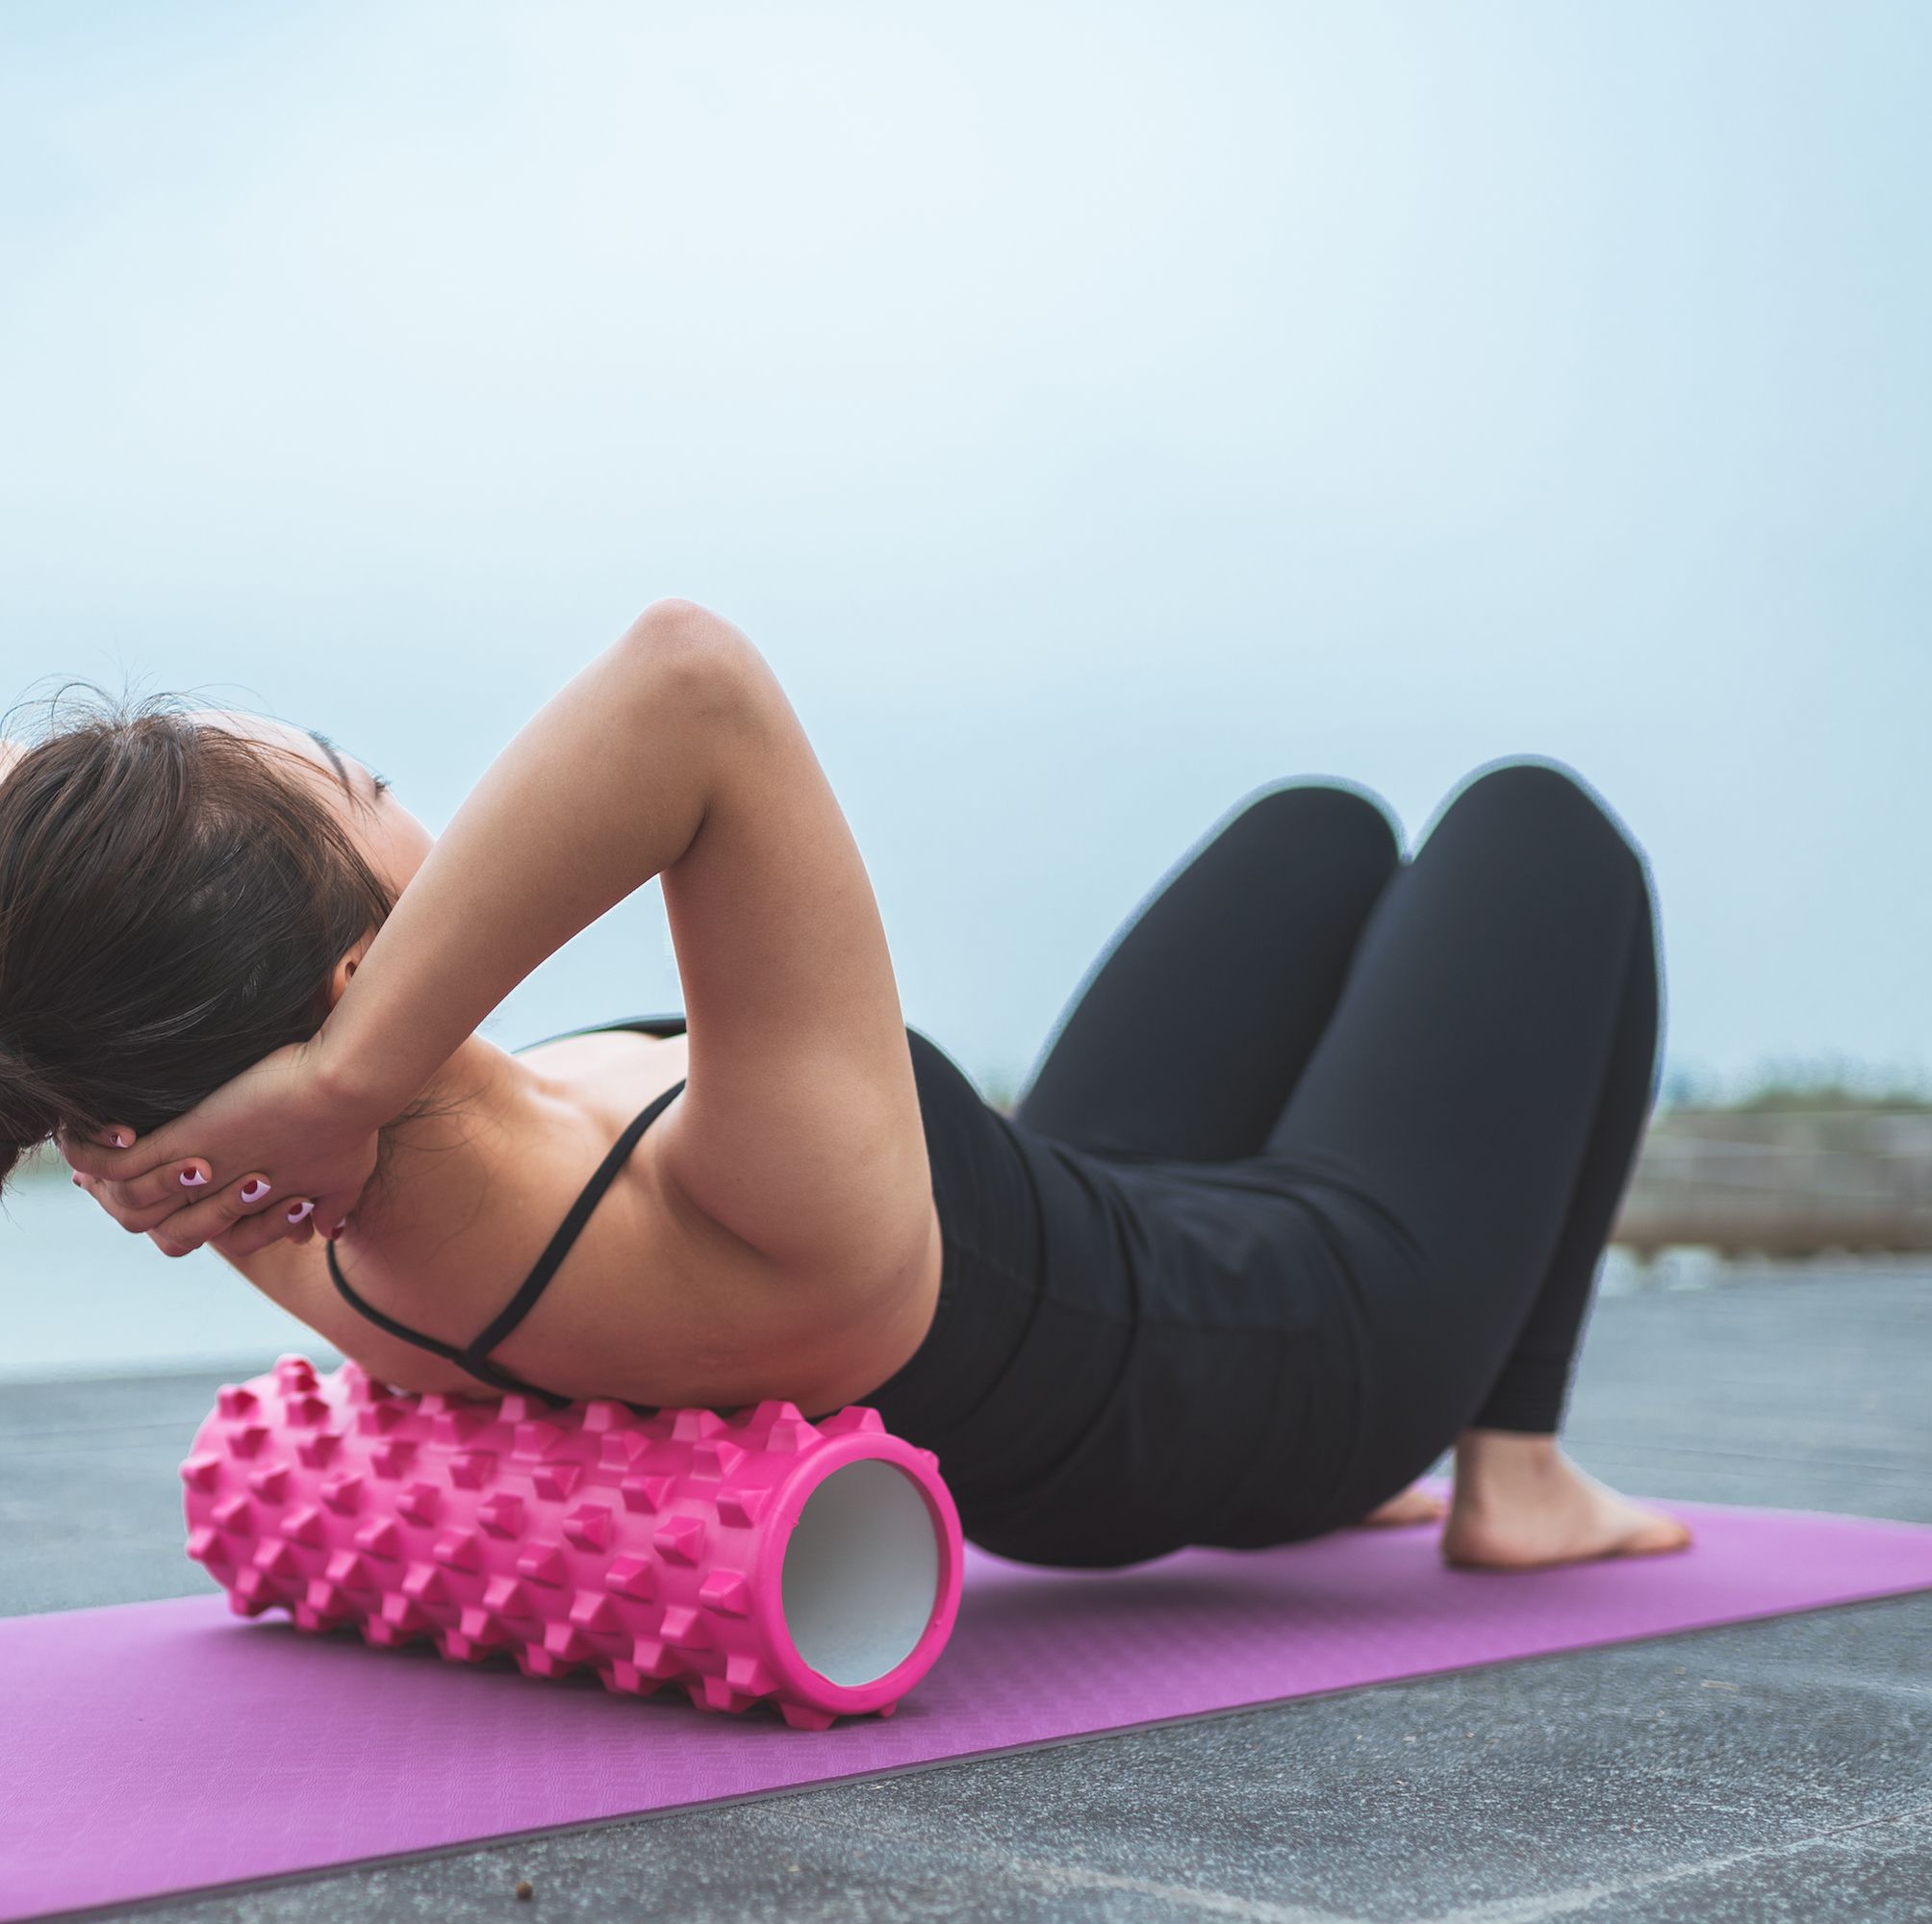 The 13 Best Exercise Mats of 2024